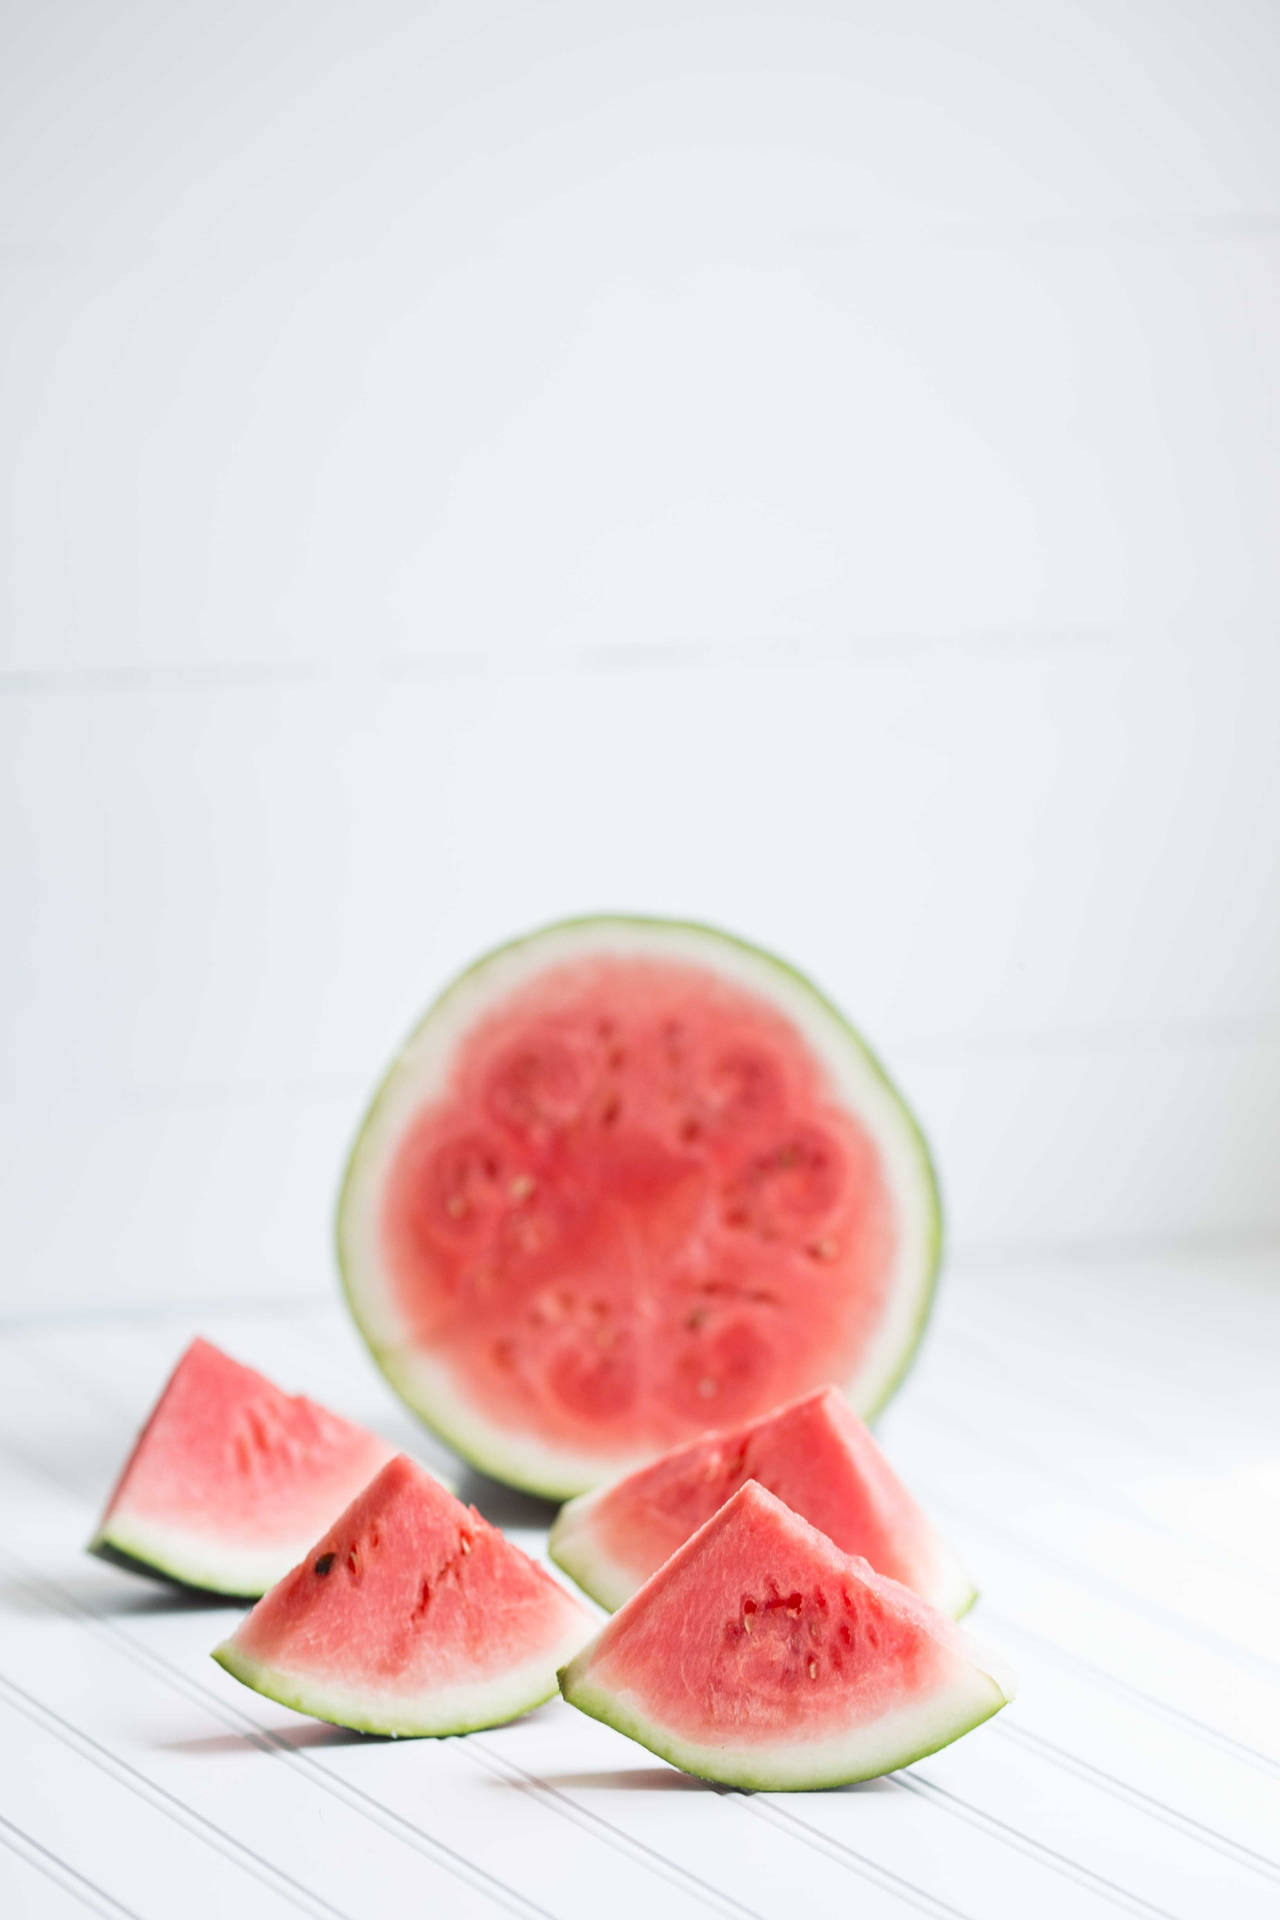 Watermelon Slices For Fruits Background